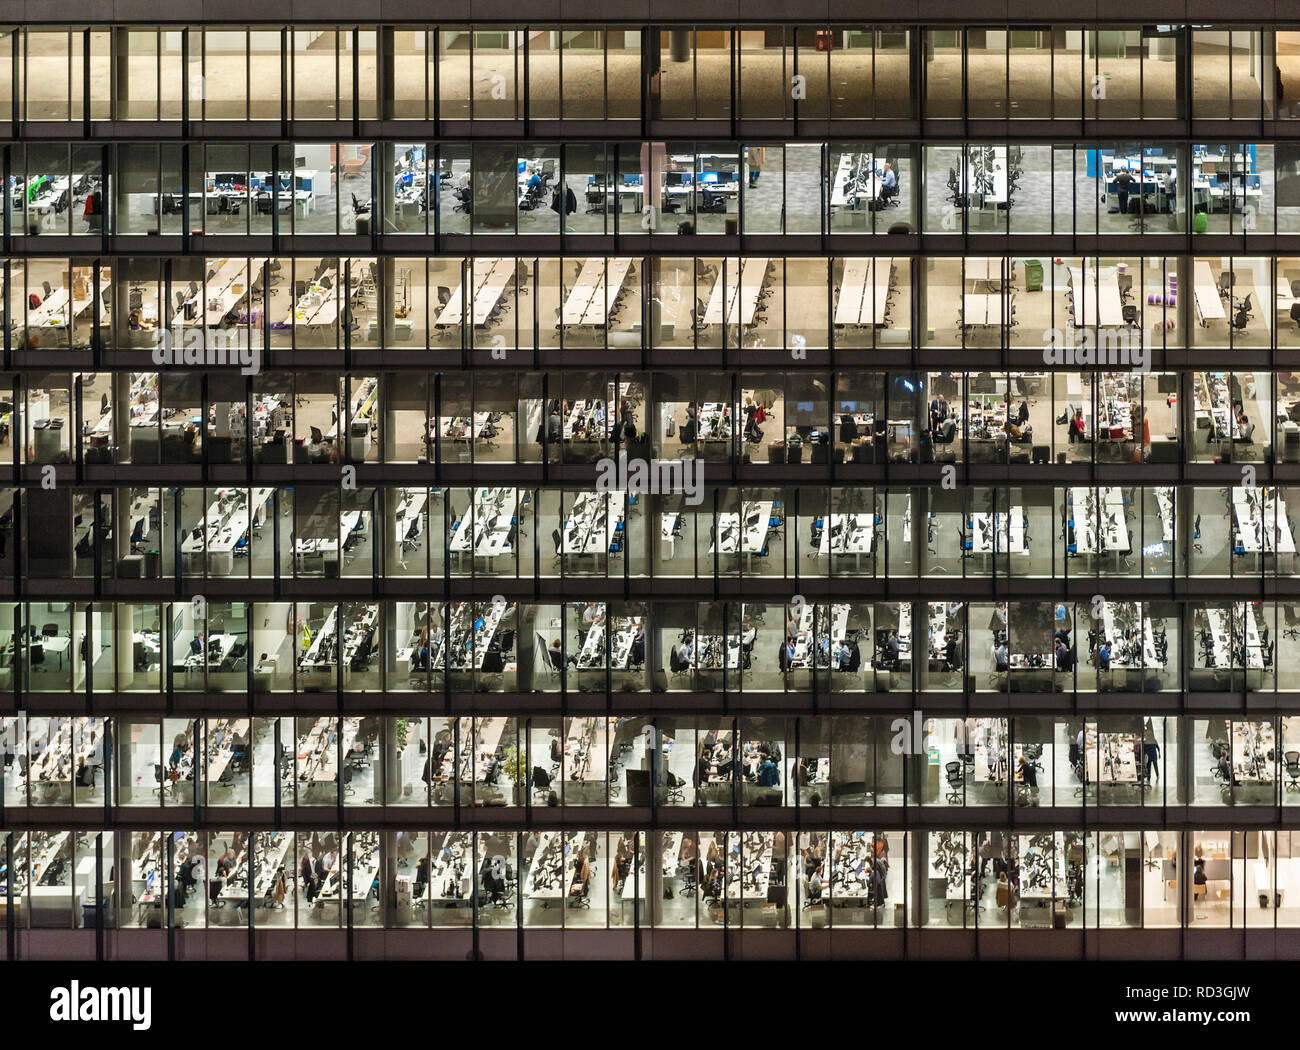 London, UK. Office workers at night, seen through the windows of an office block in the City, London's financial district Stock Photo